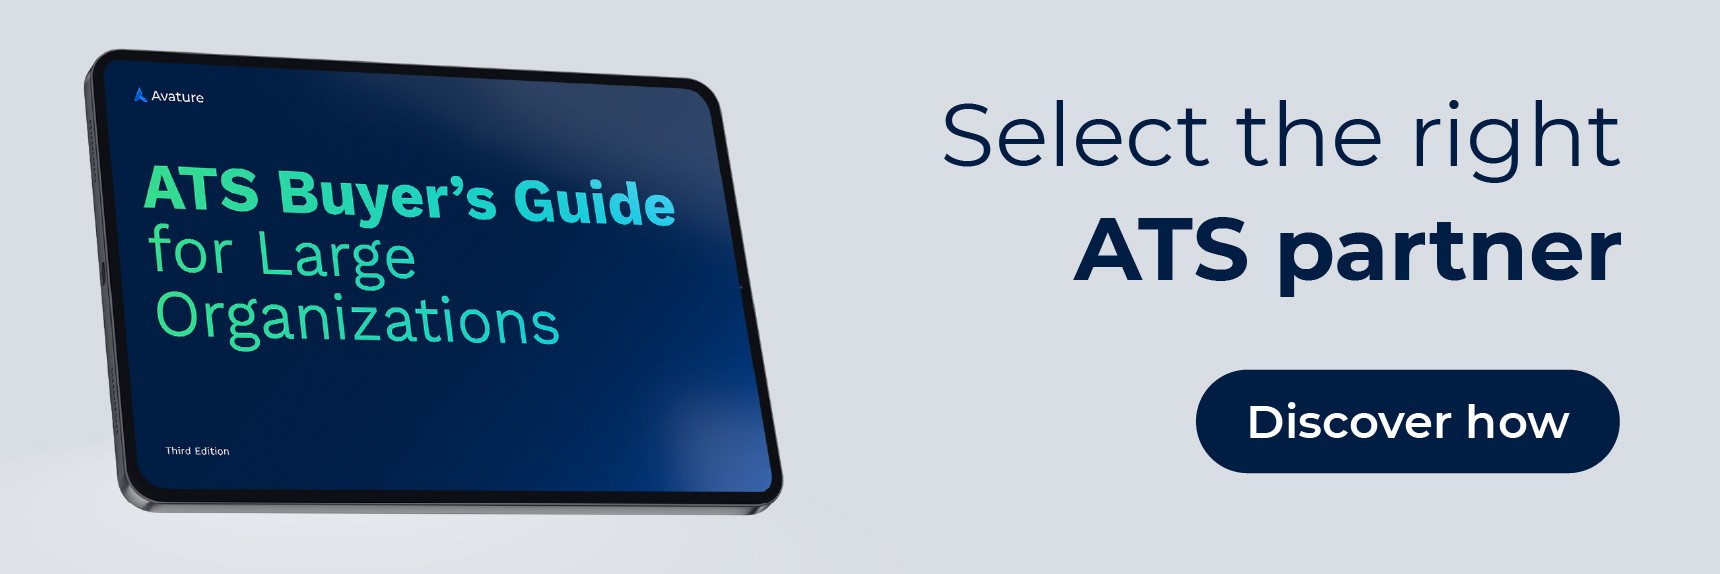 Banner of Avature's ATS buyer's guide and a link to the landing page to download it.